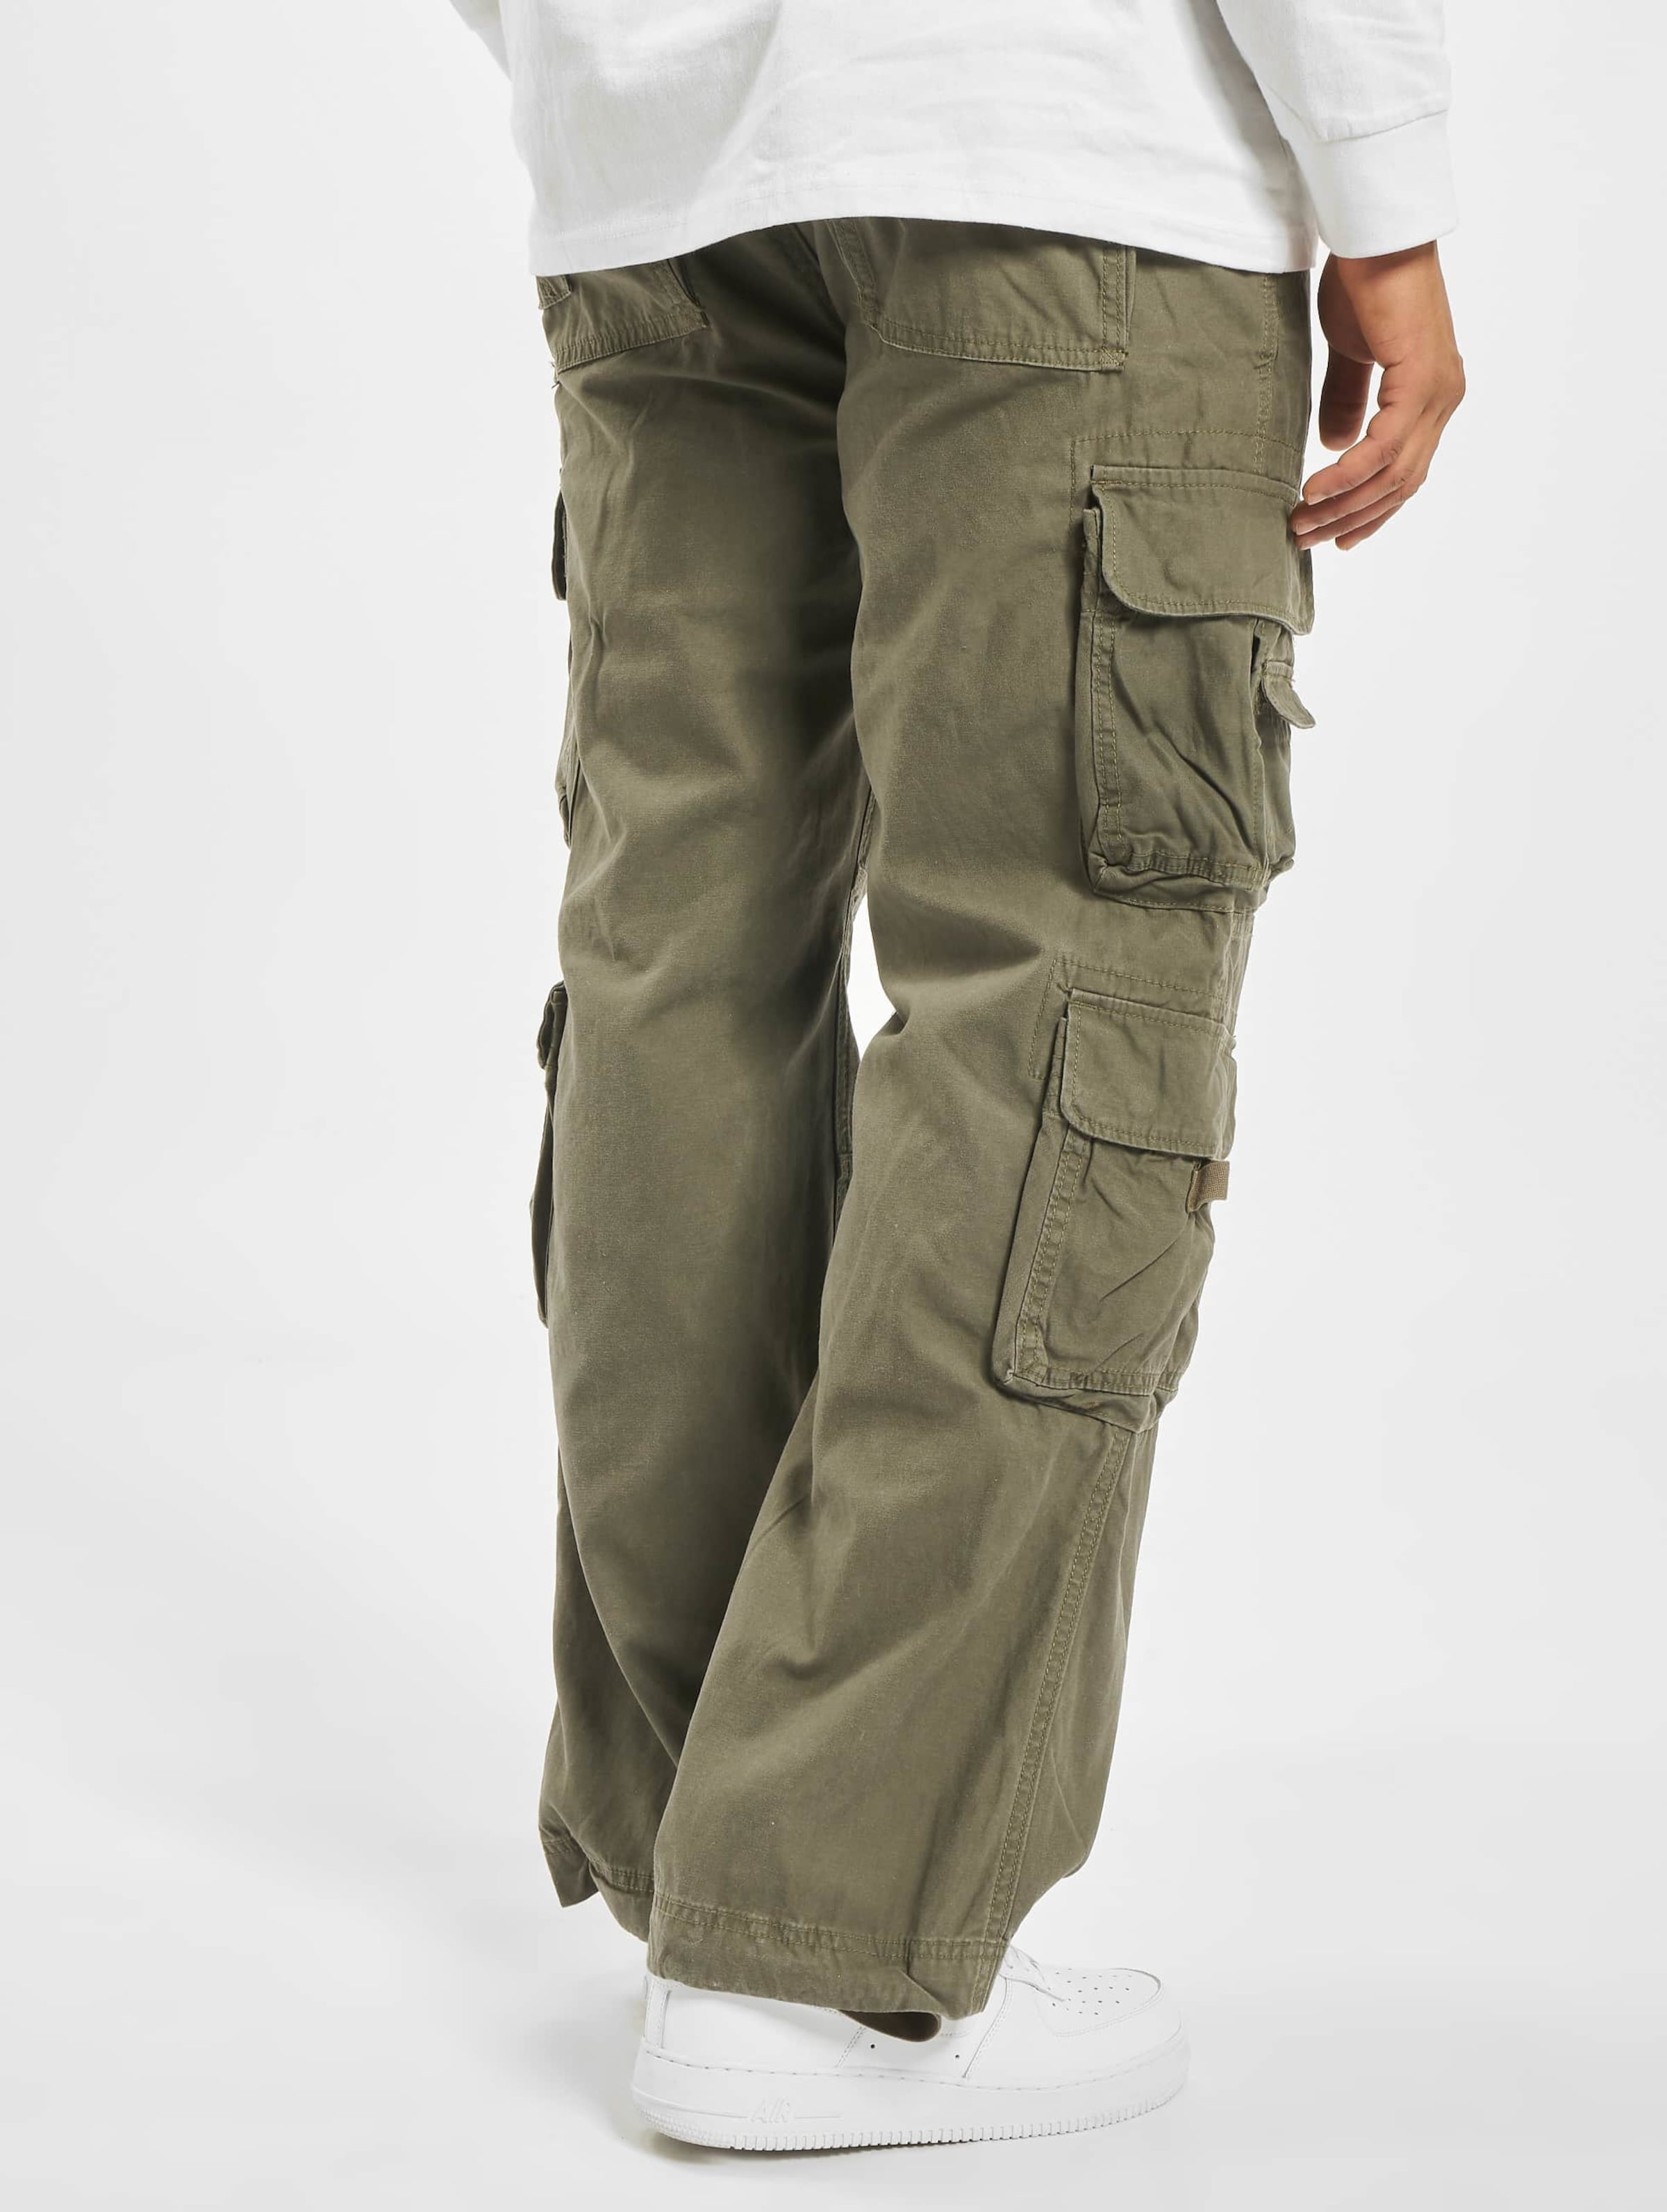 M51 vintage cargo pants, Men's Fashion, Bottoms, Trousers on Carousell